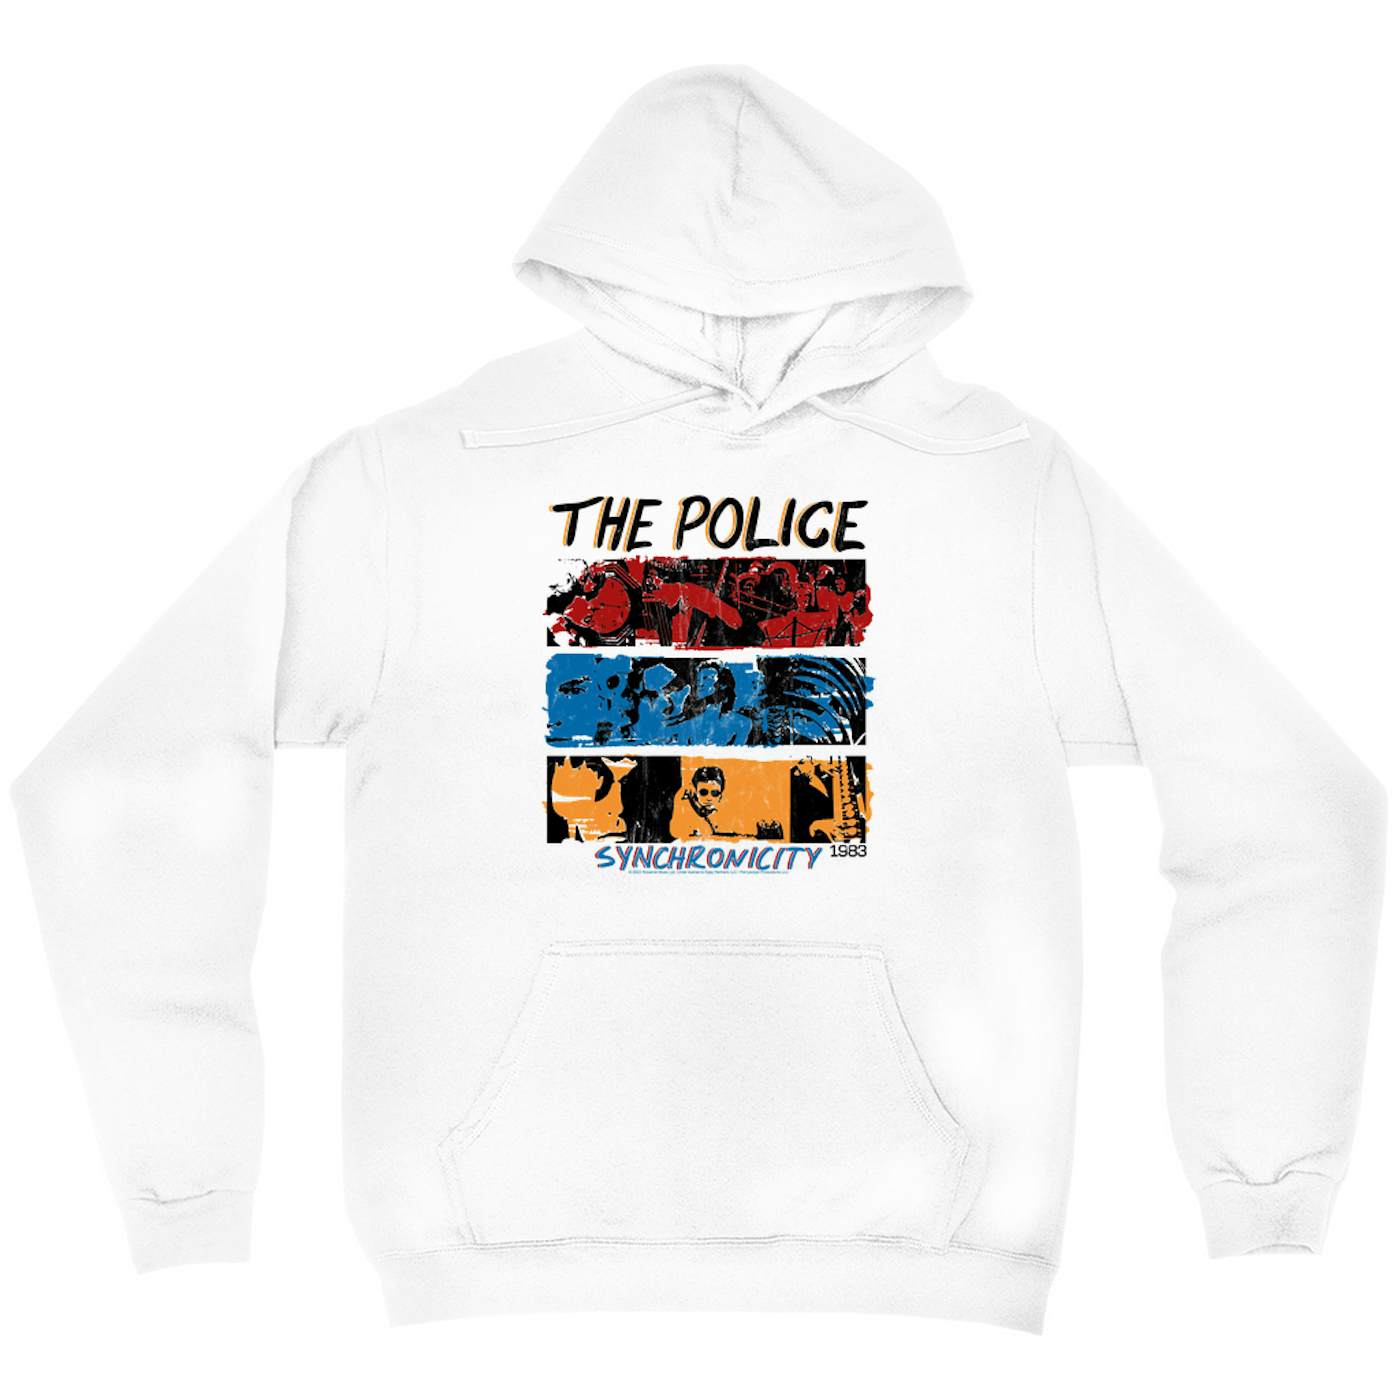 The Police Hoodie | 1983 Synchronicity Tour Distressed (Merchbar Exclusive) The Police Hoodie